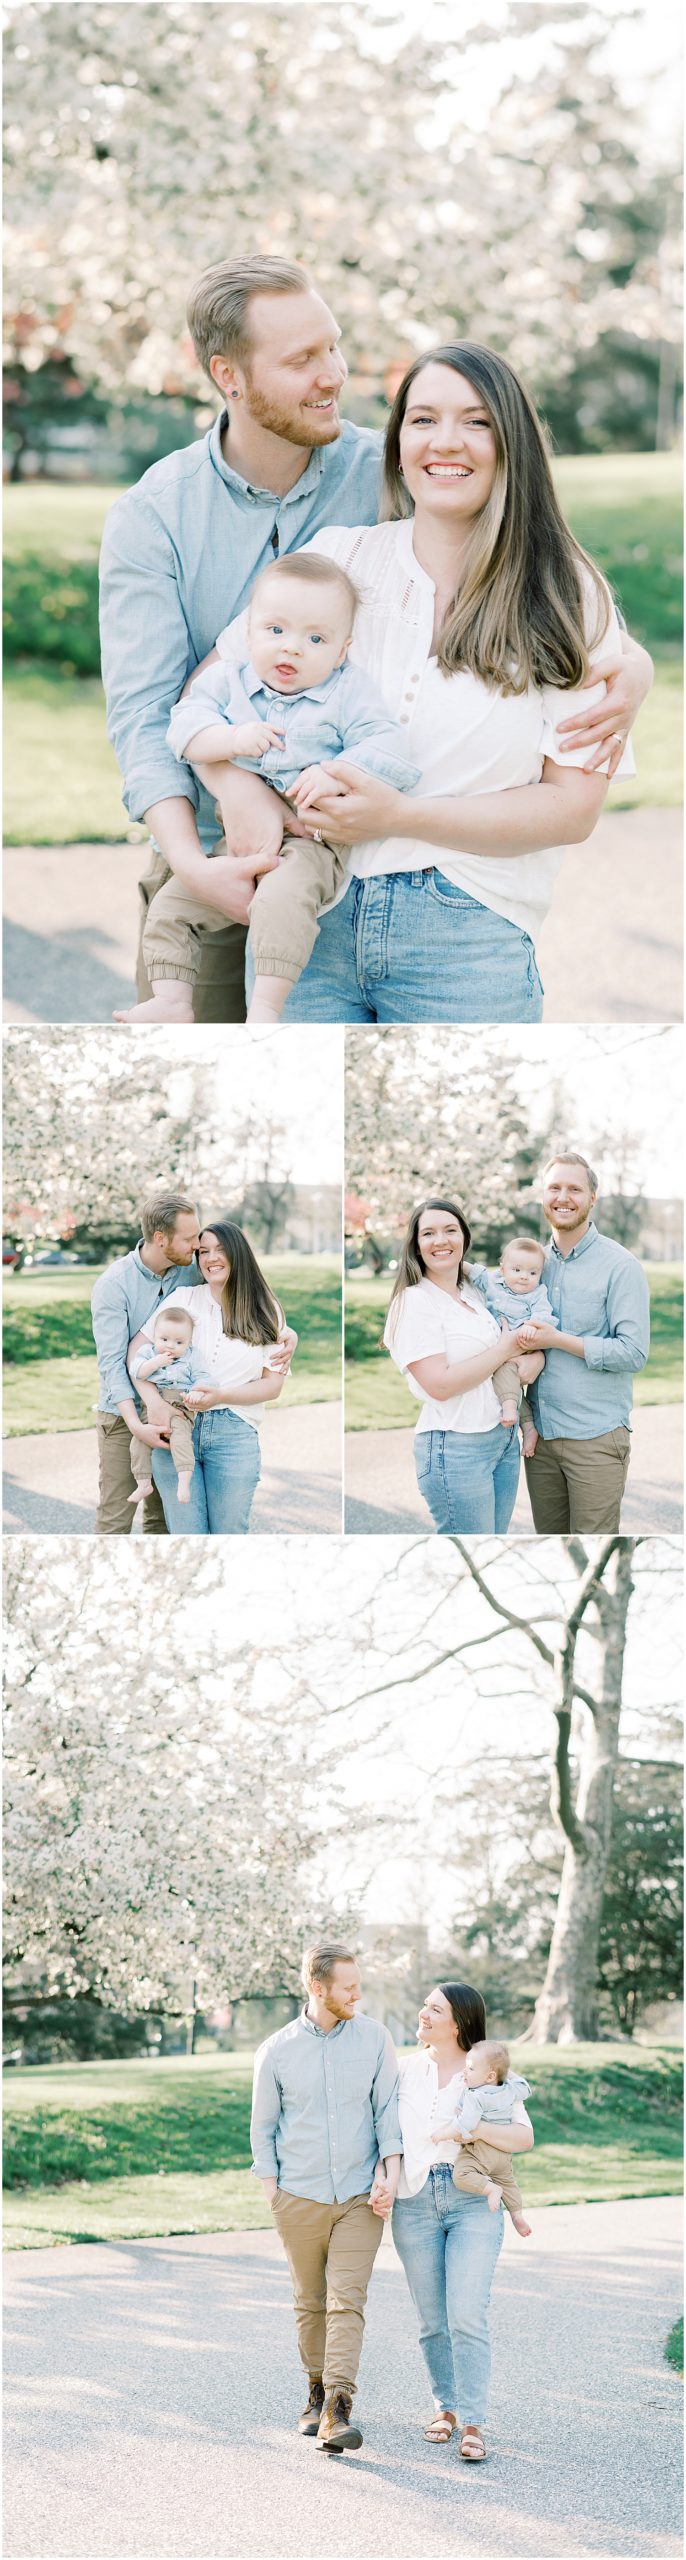 mom and dad wear blue accent colors for spring family session in Pennsylvania by Addie Eshelman